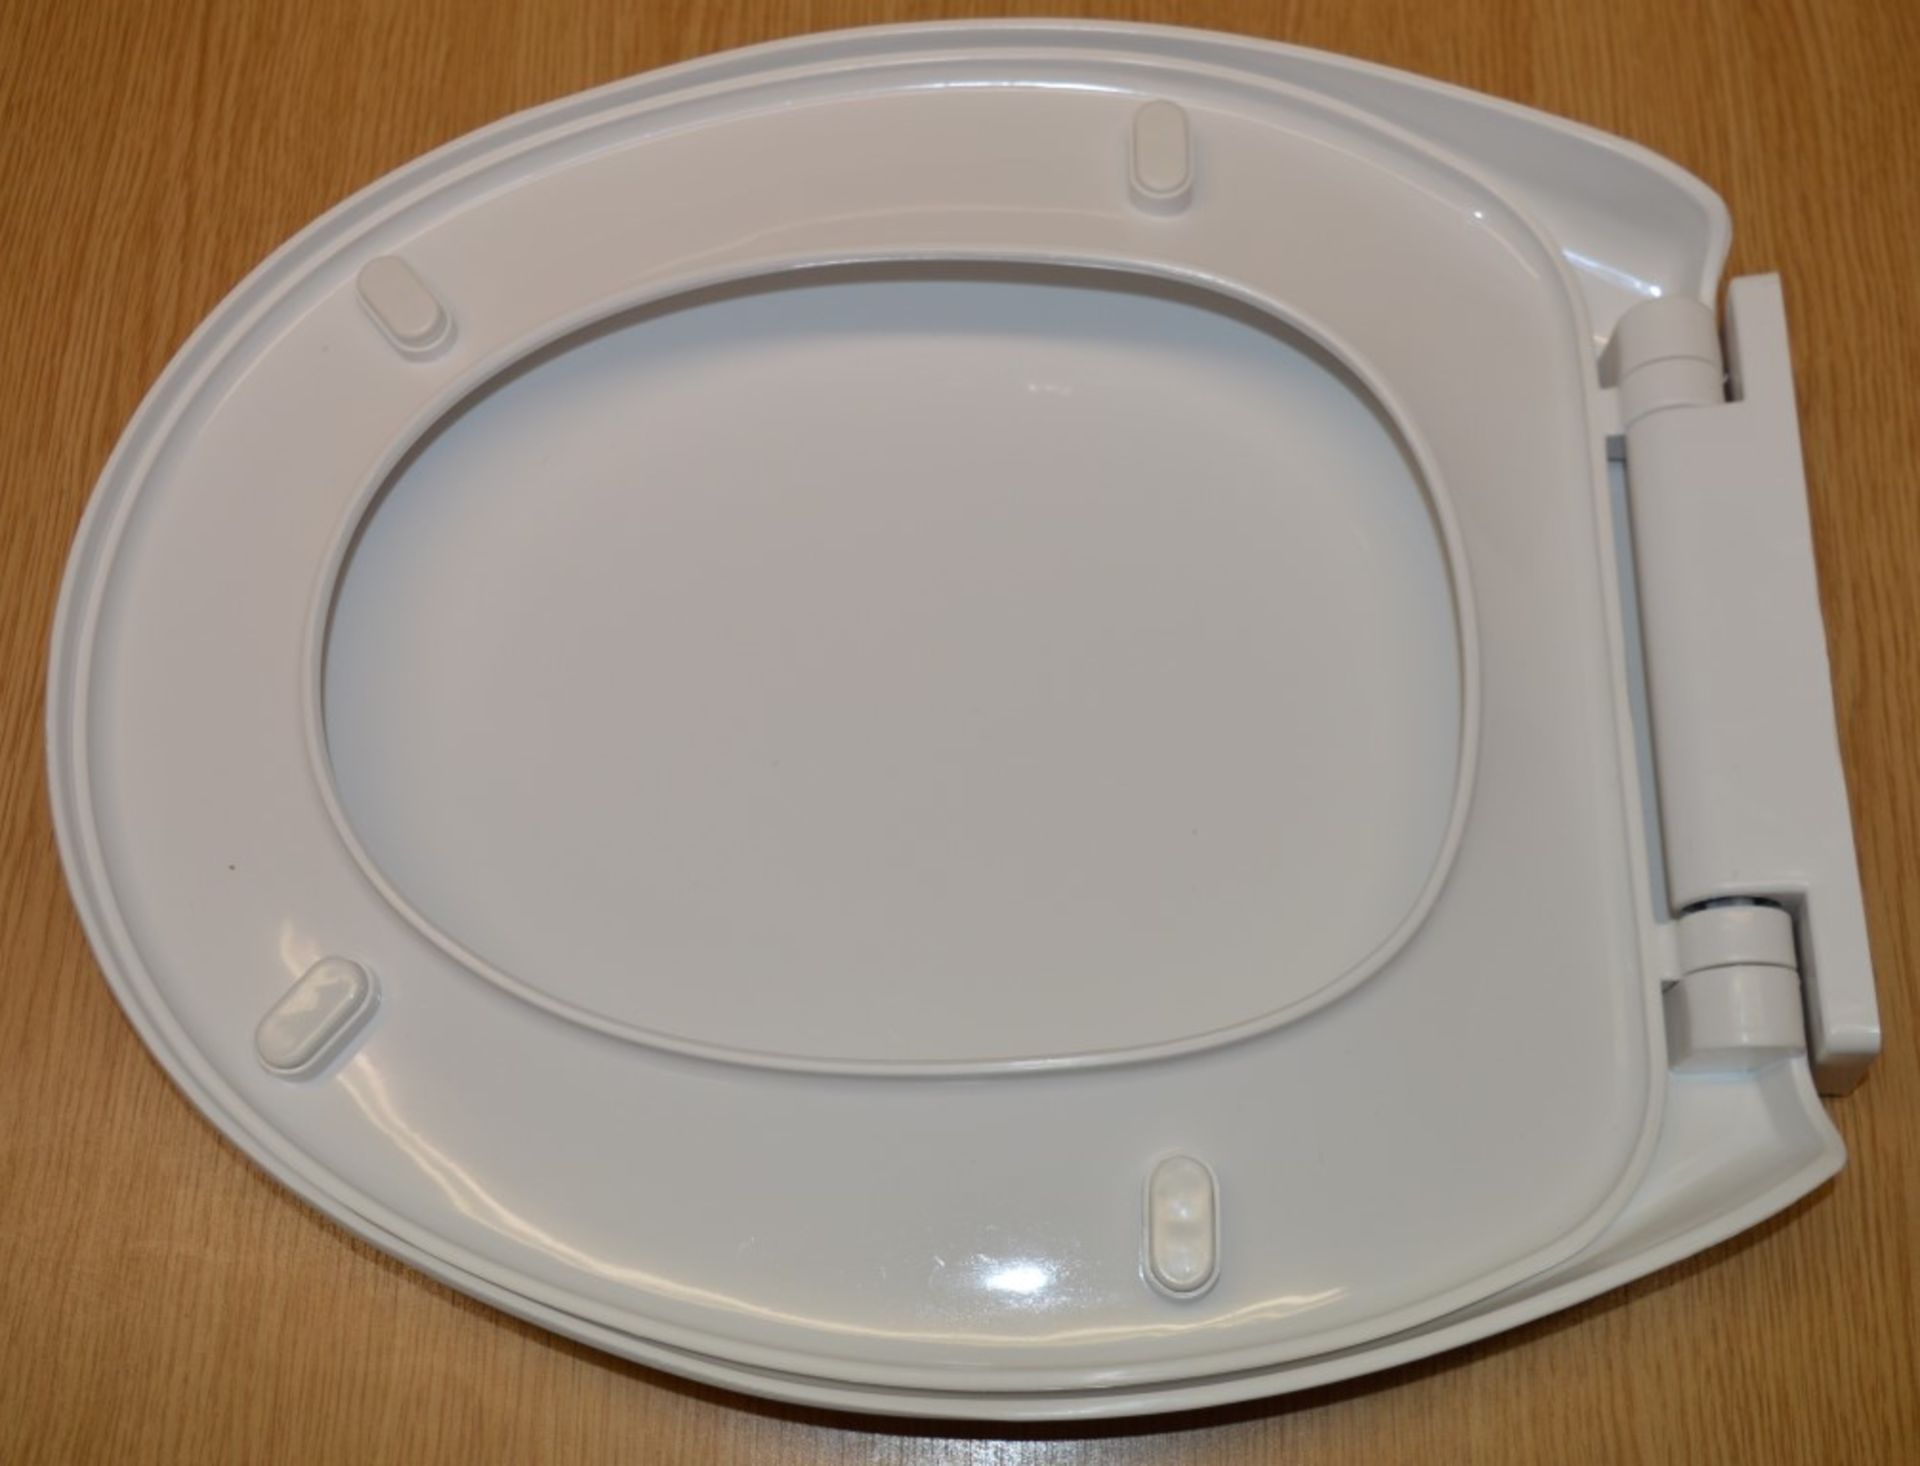 6 x Soft Close COMFORT Toilet Seats - Brand New Boxed Stock - CL034 - Ideal For Resale - Vogue - Image 4 of 7